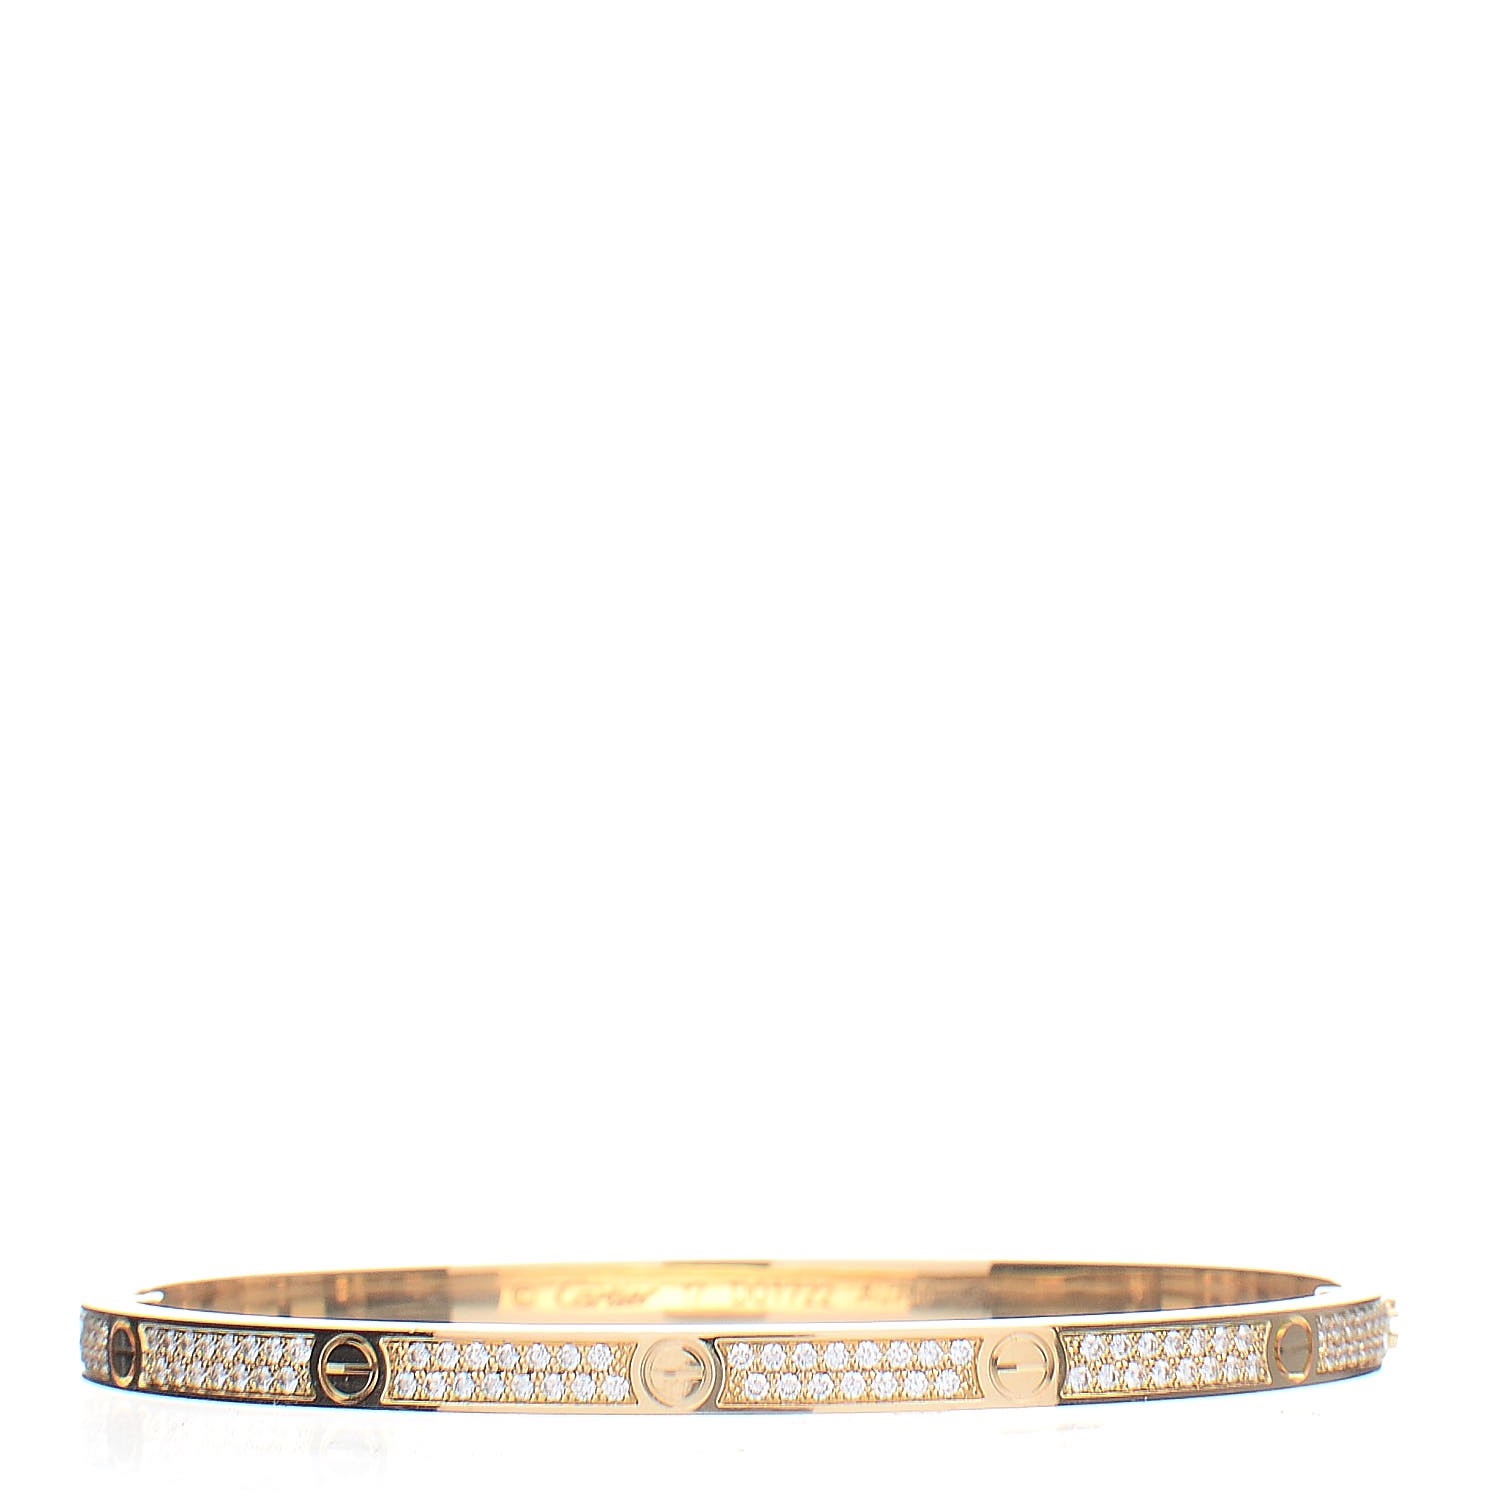 Cartier 18k Yellow Gold Pave Diamond Small Love Bracelet 17 292931,Picture Of A Rational Number